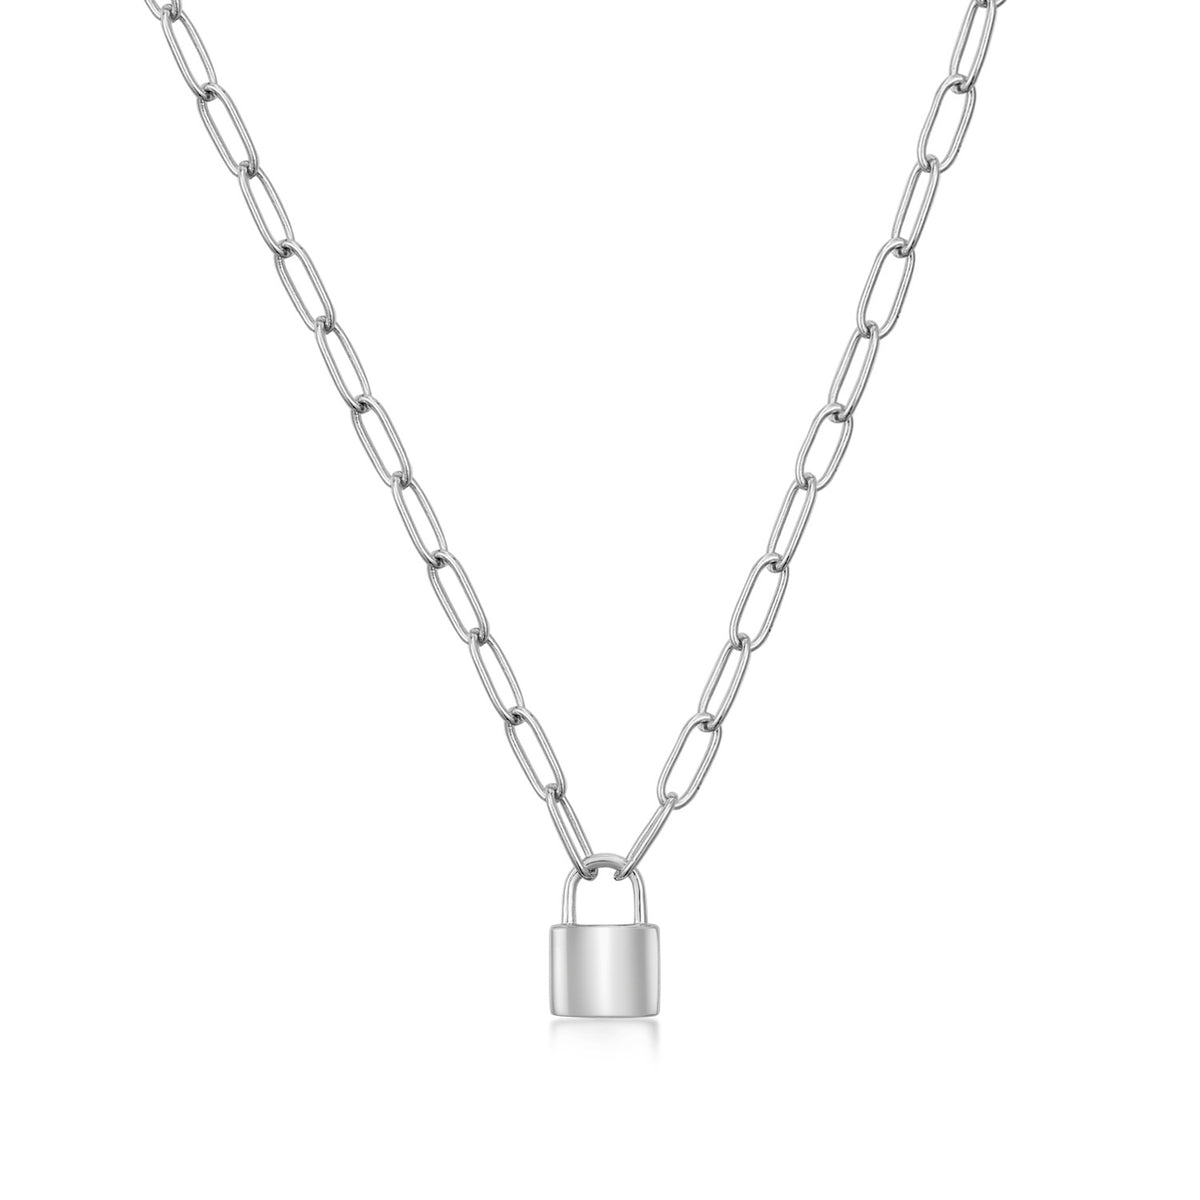 Love Collcetion | Kalukoi Necklace | White Rhodium Plated 925 Silver